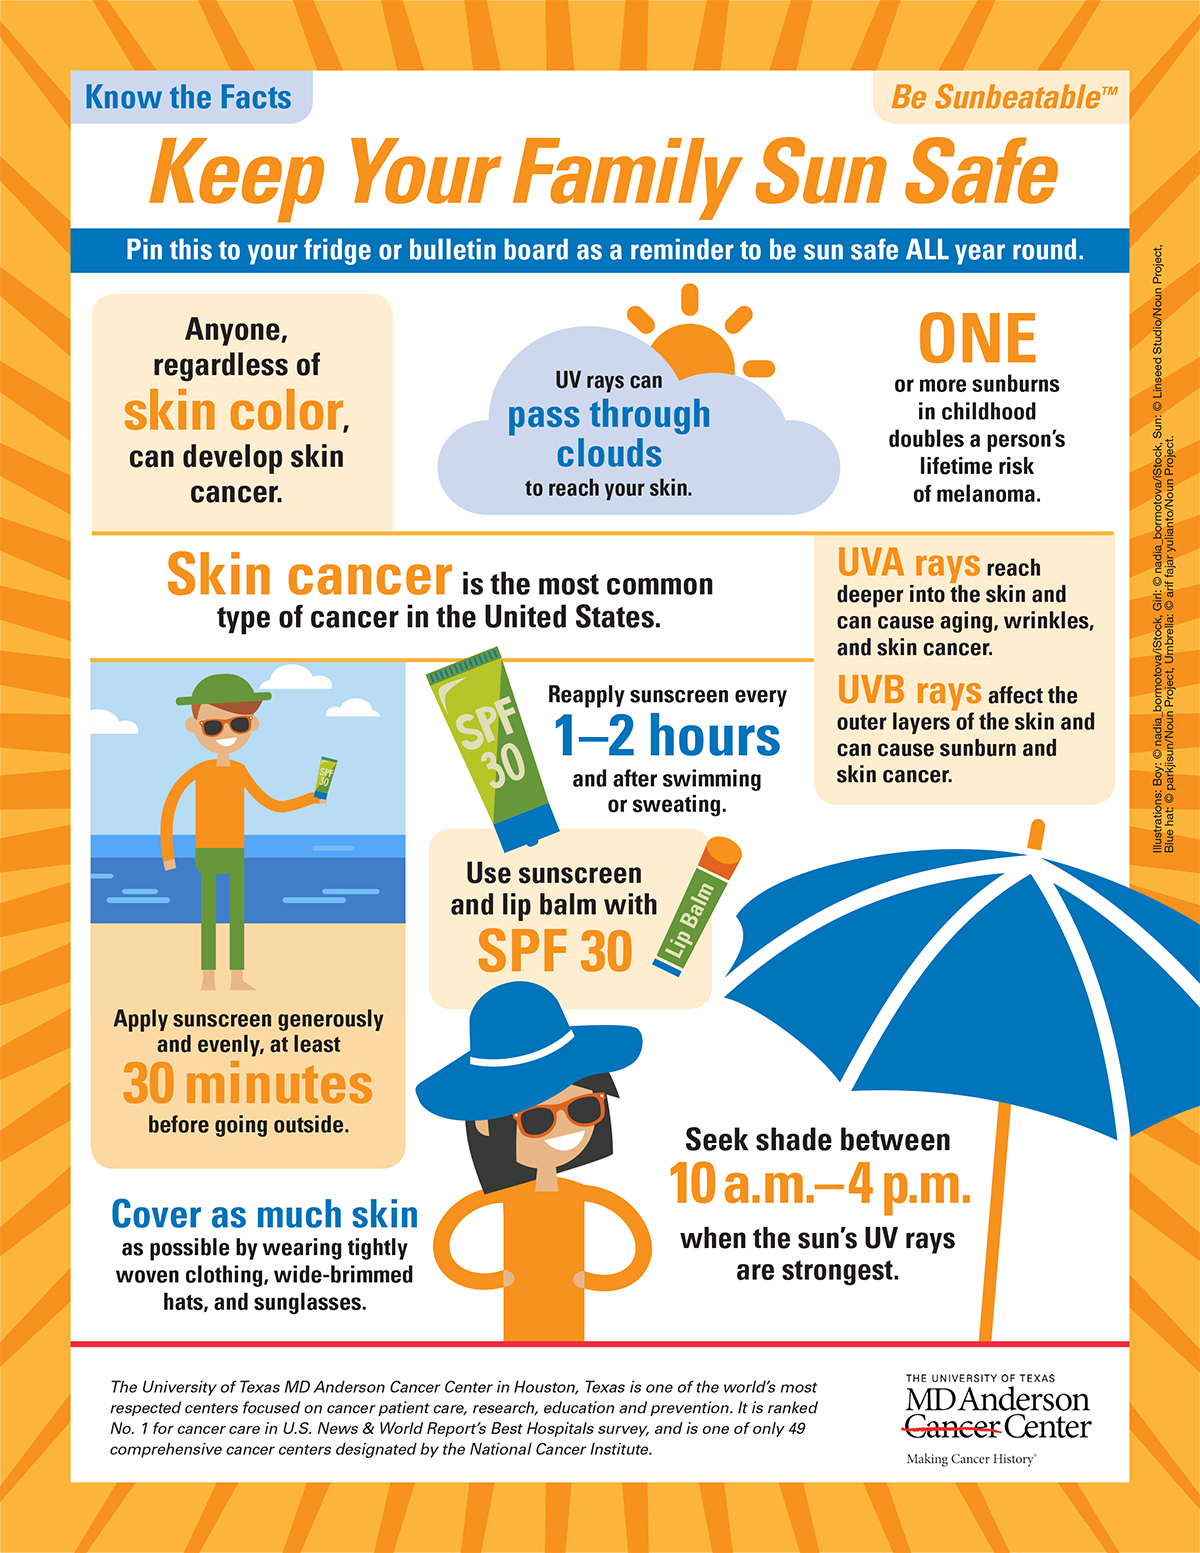 10 tips for getting the best sun tan safely